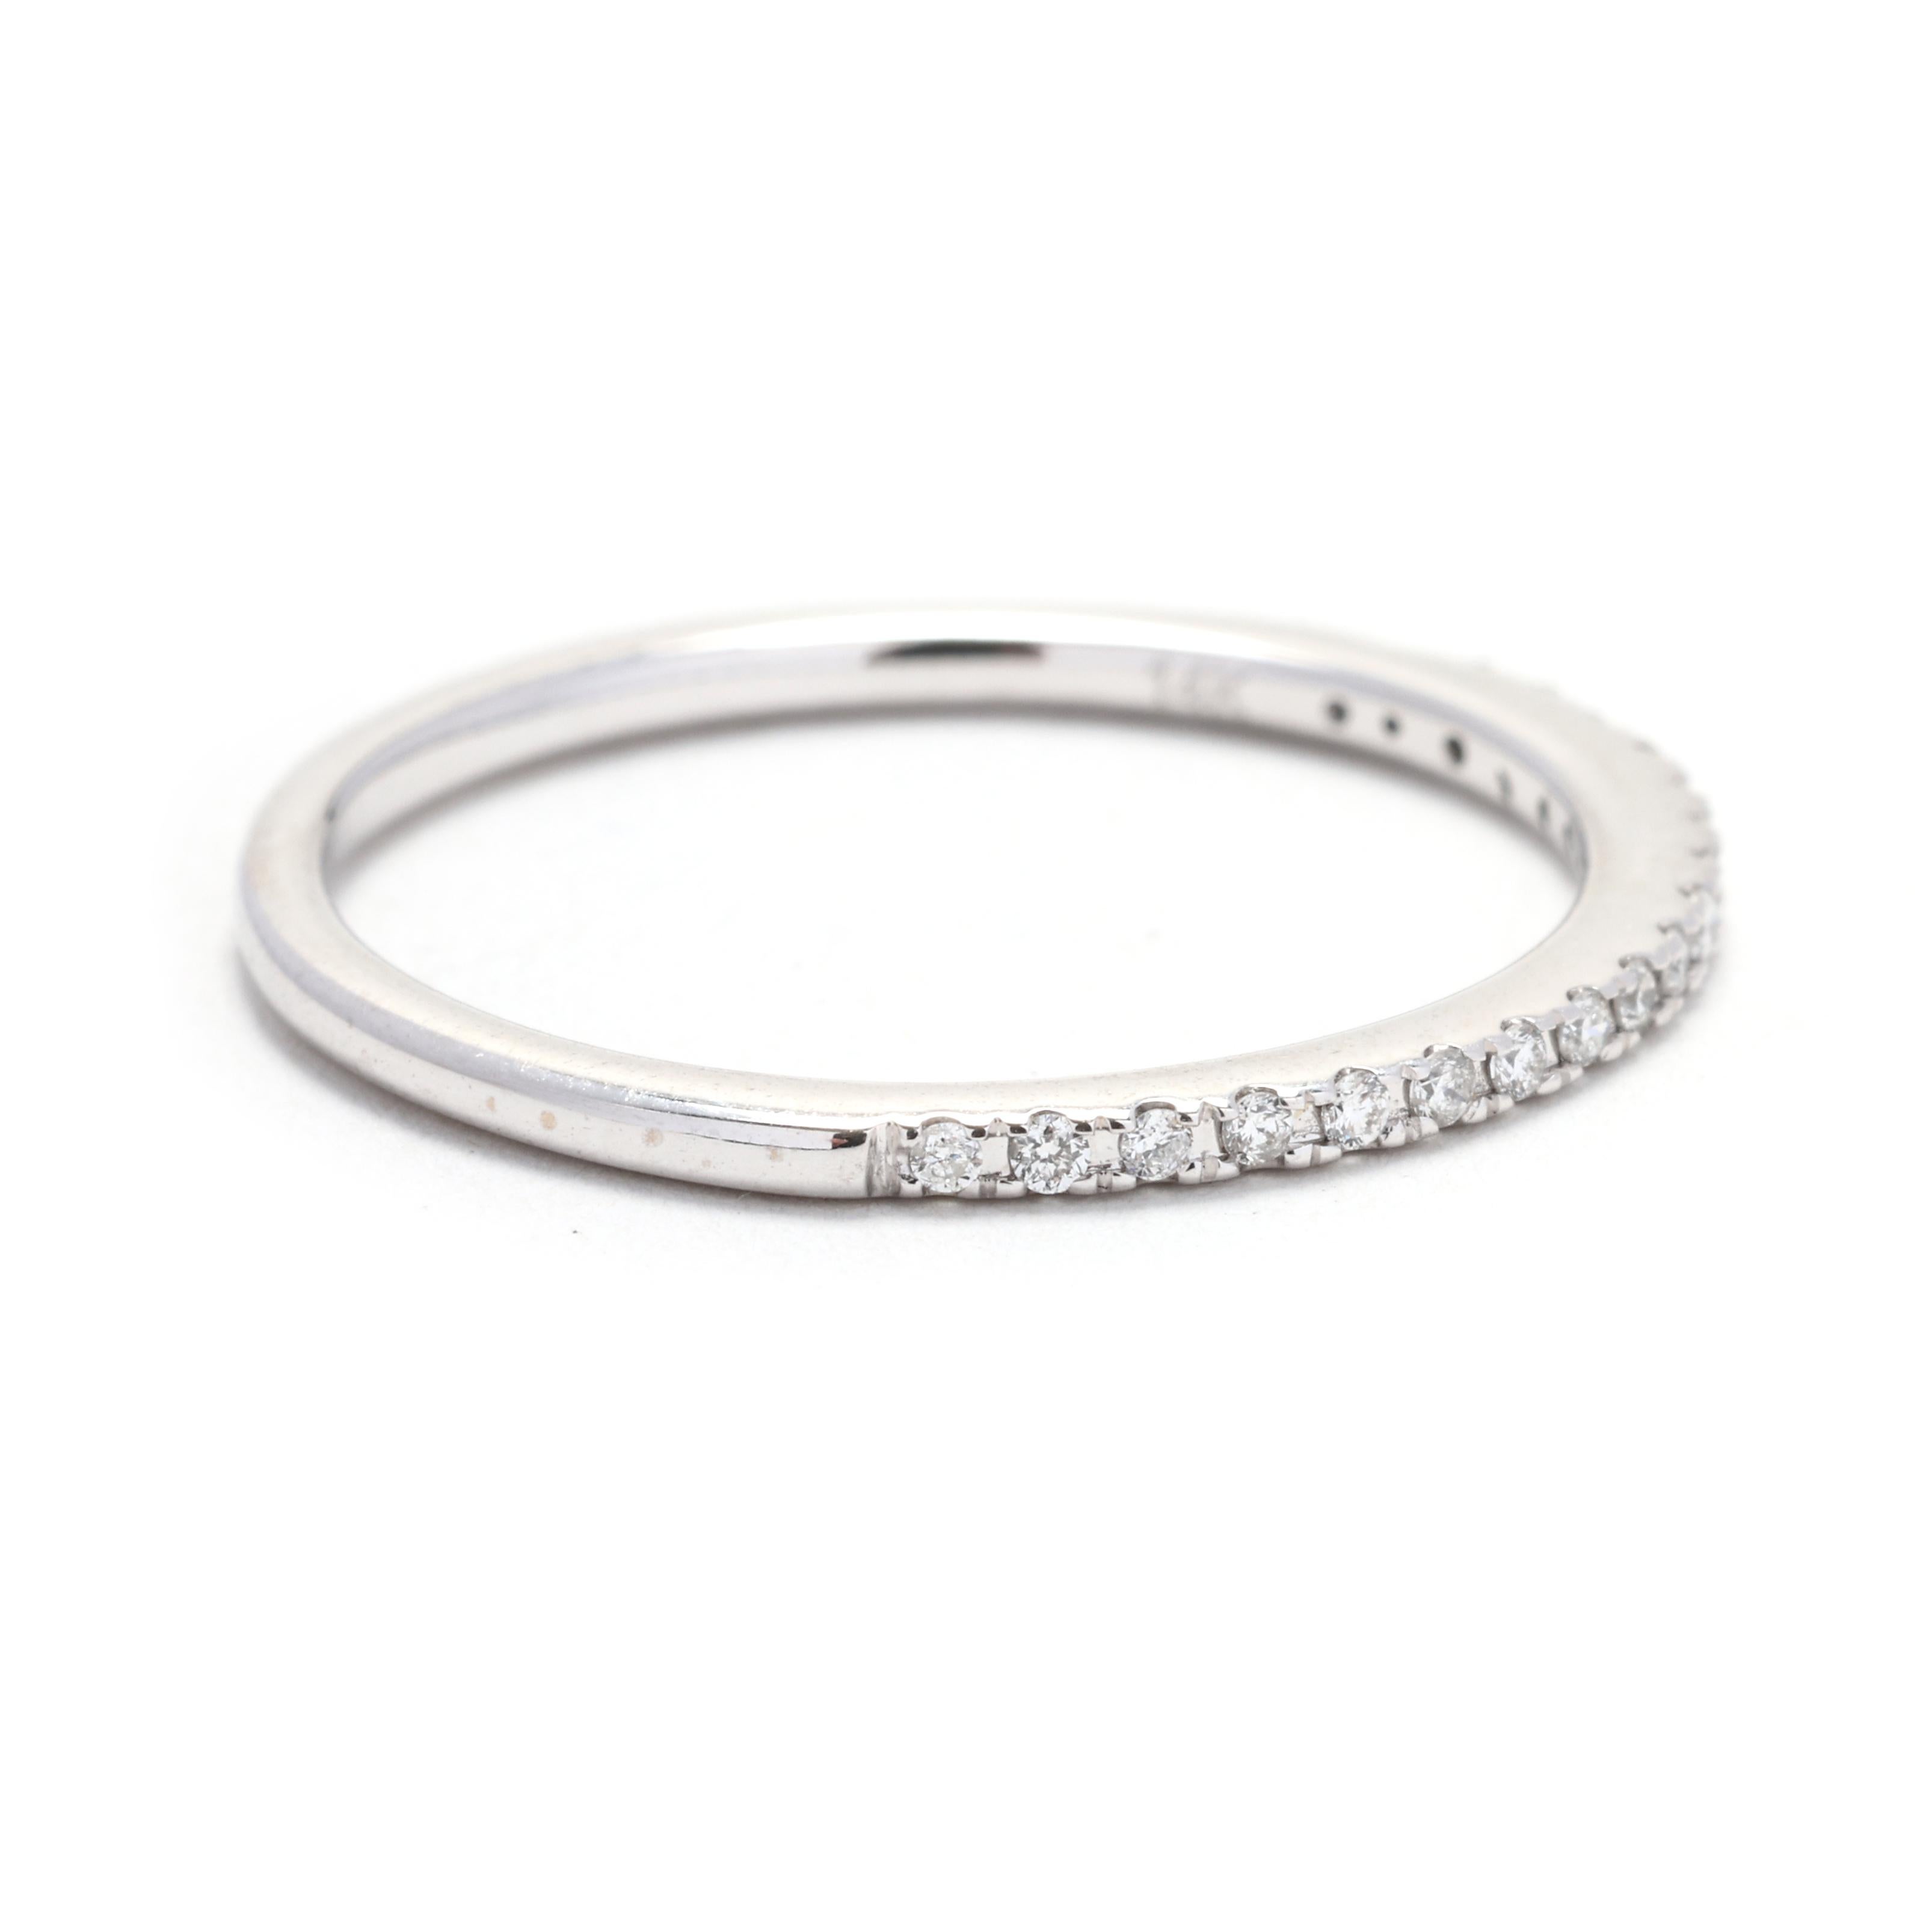 This delicate and elegant diamond thin band ring is the perfect addition to your jewelry collection. Made of 14k white gold, this ring features a row of dazzling diamonds totaling 0.10 carats. The classic and timeless design makes it ideal for